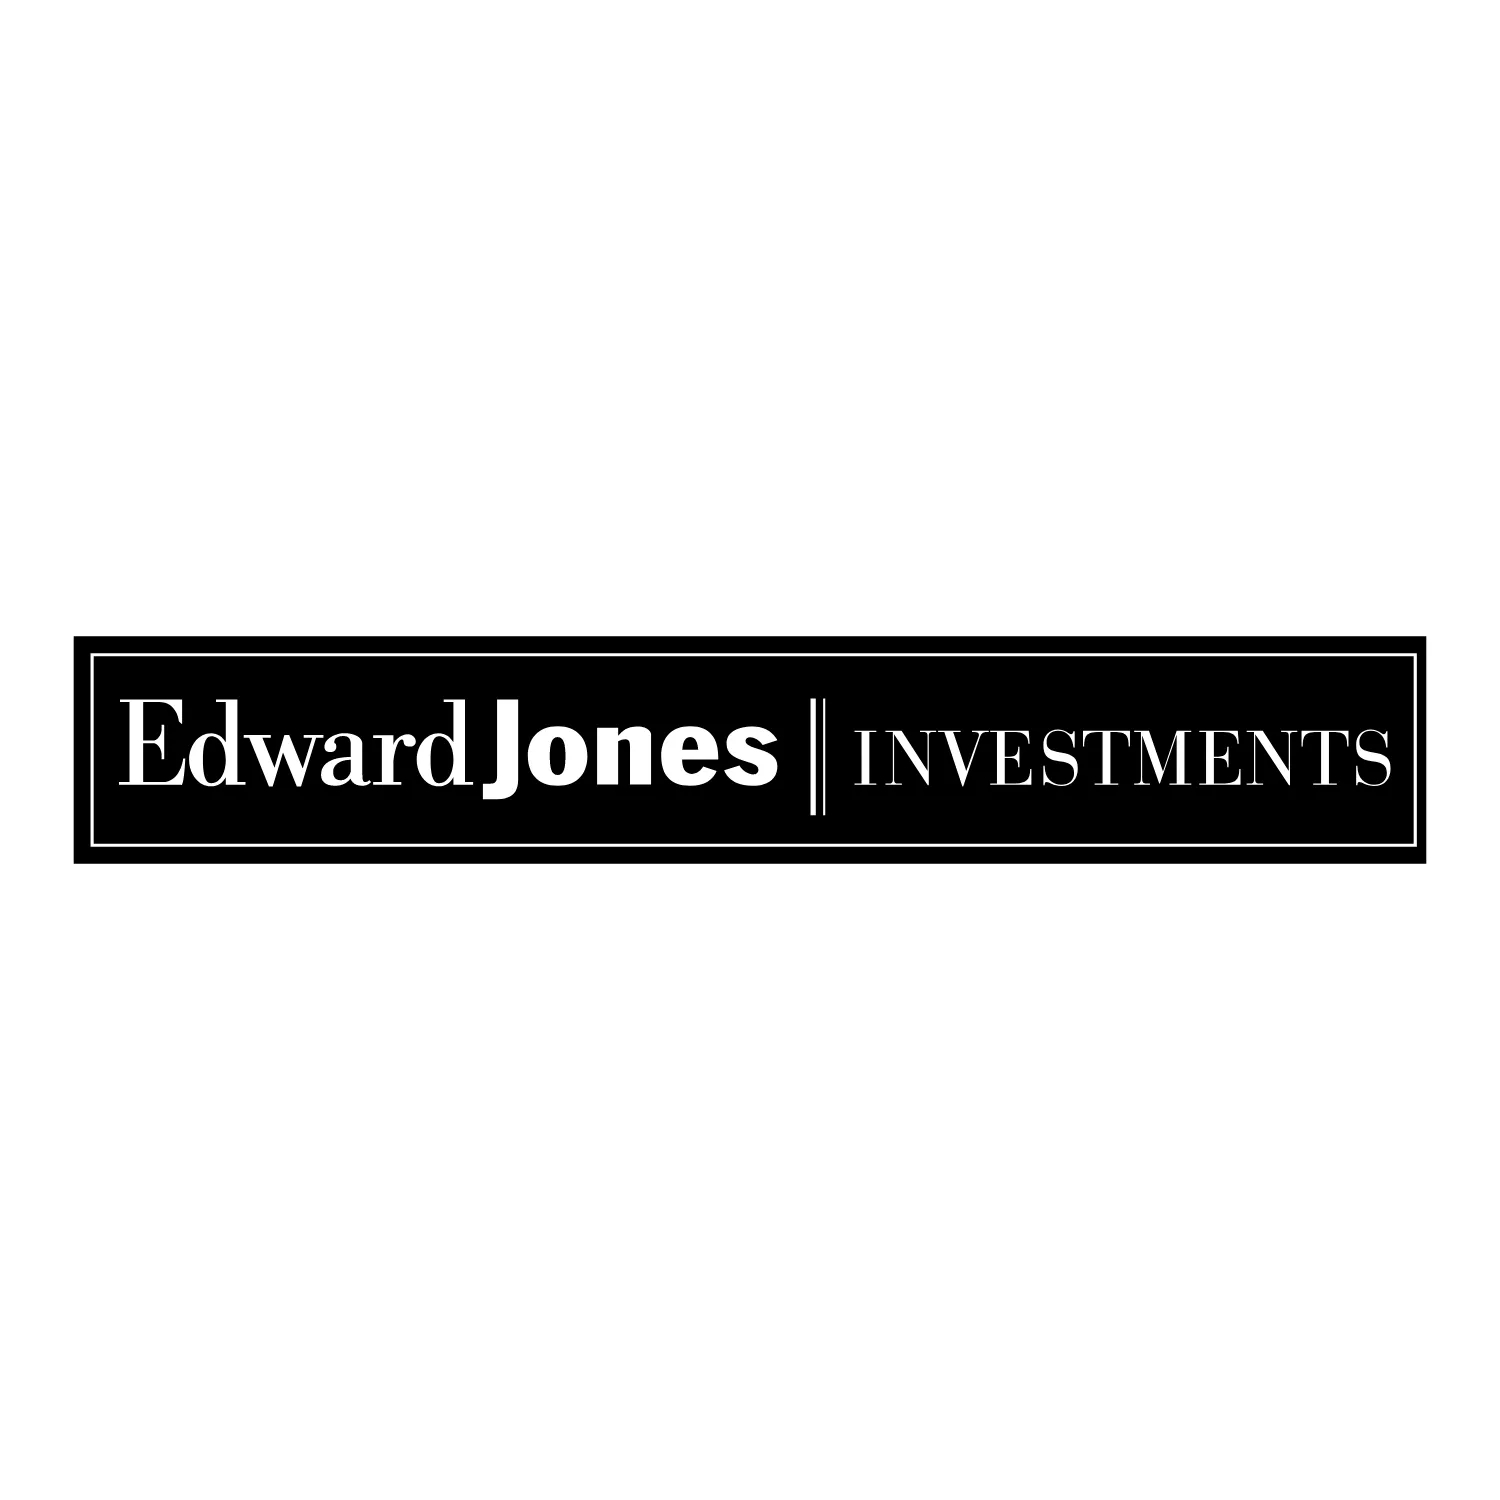 Database of Edward Jones Locations in the United States